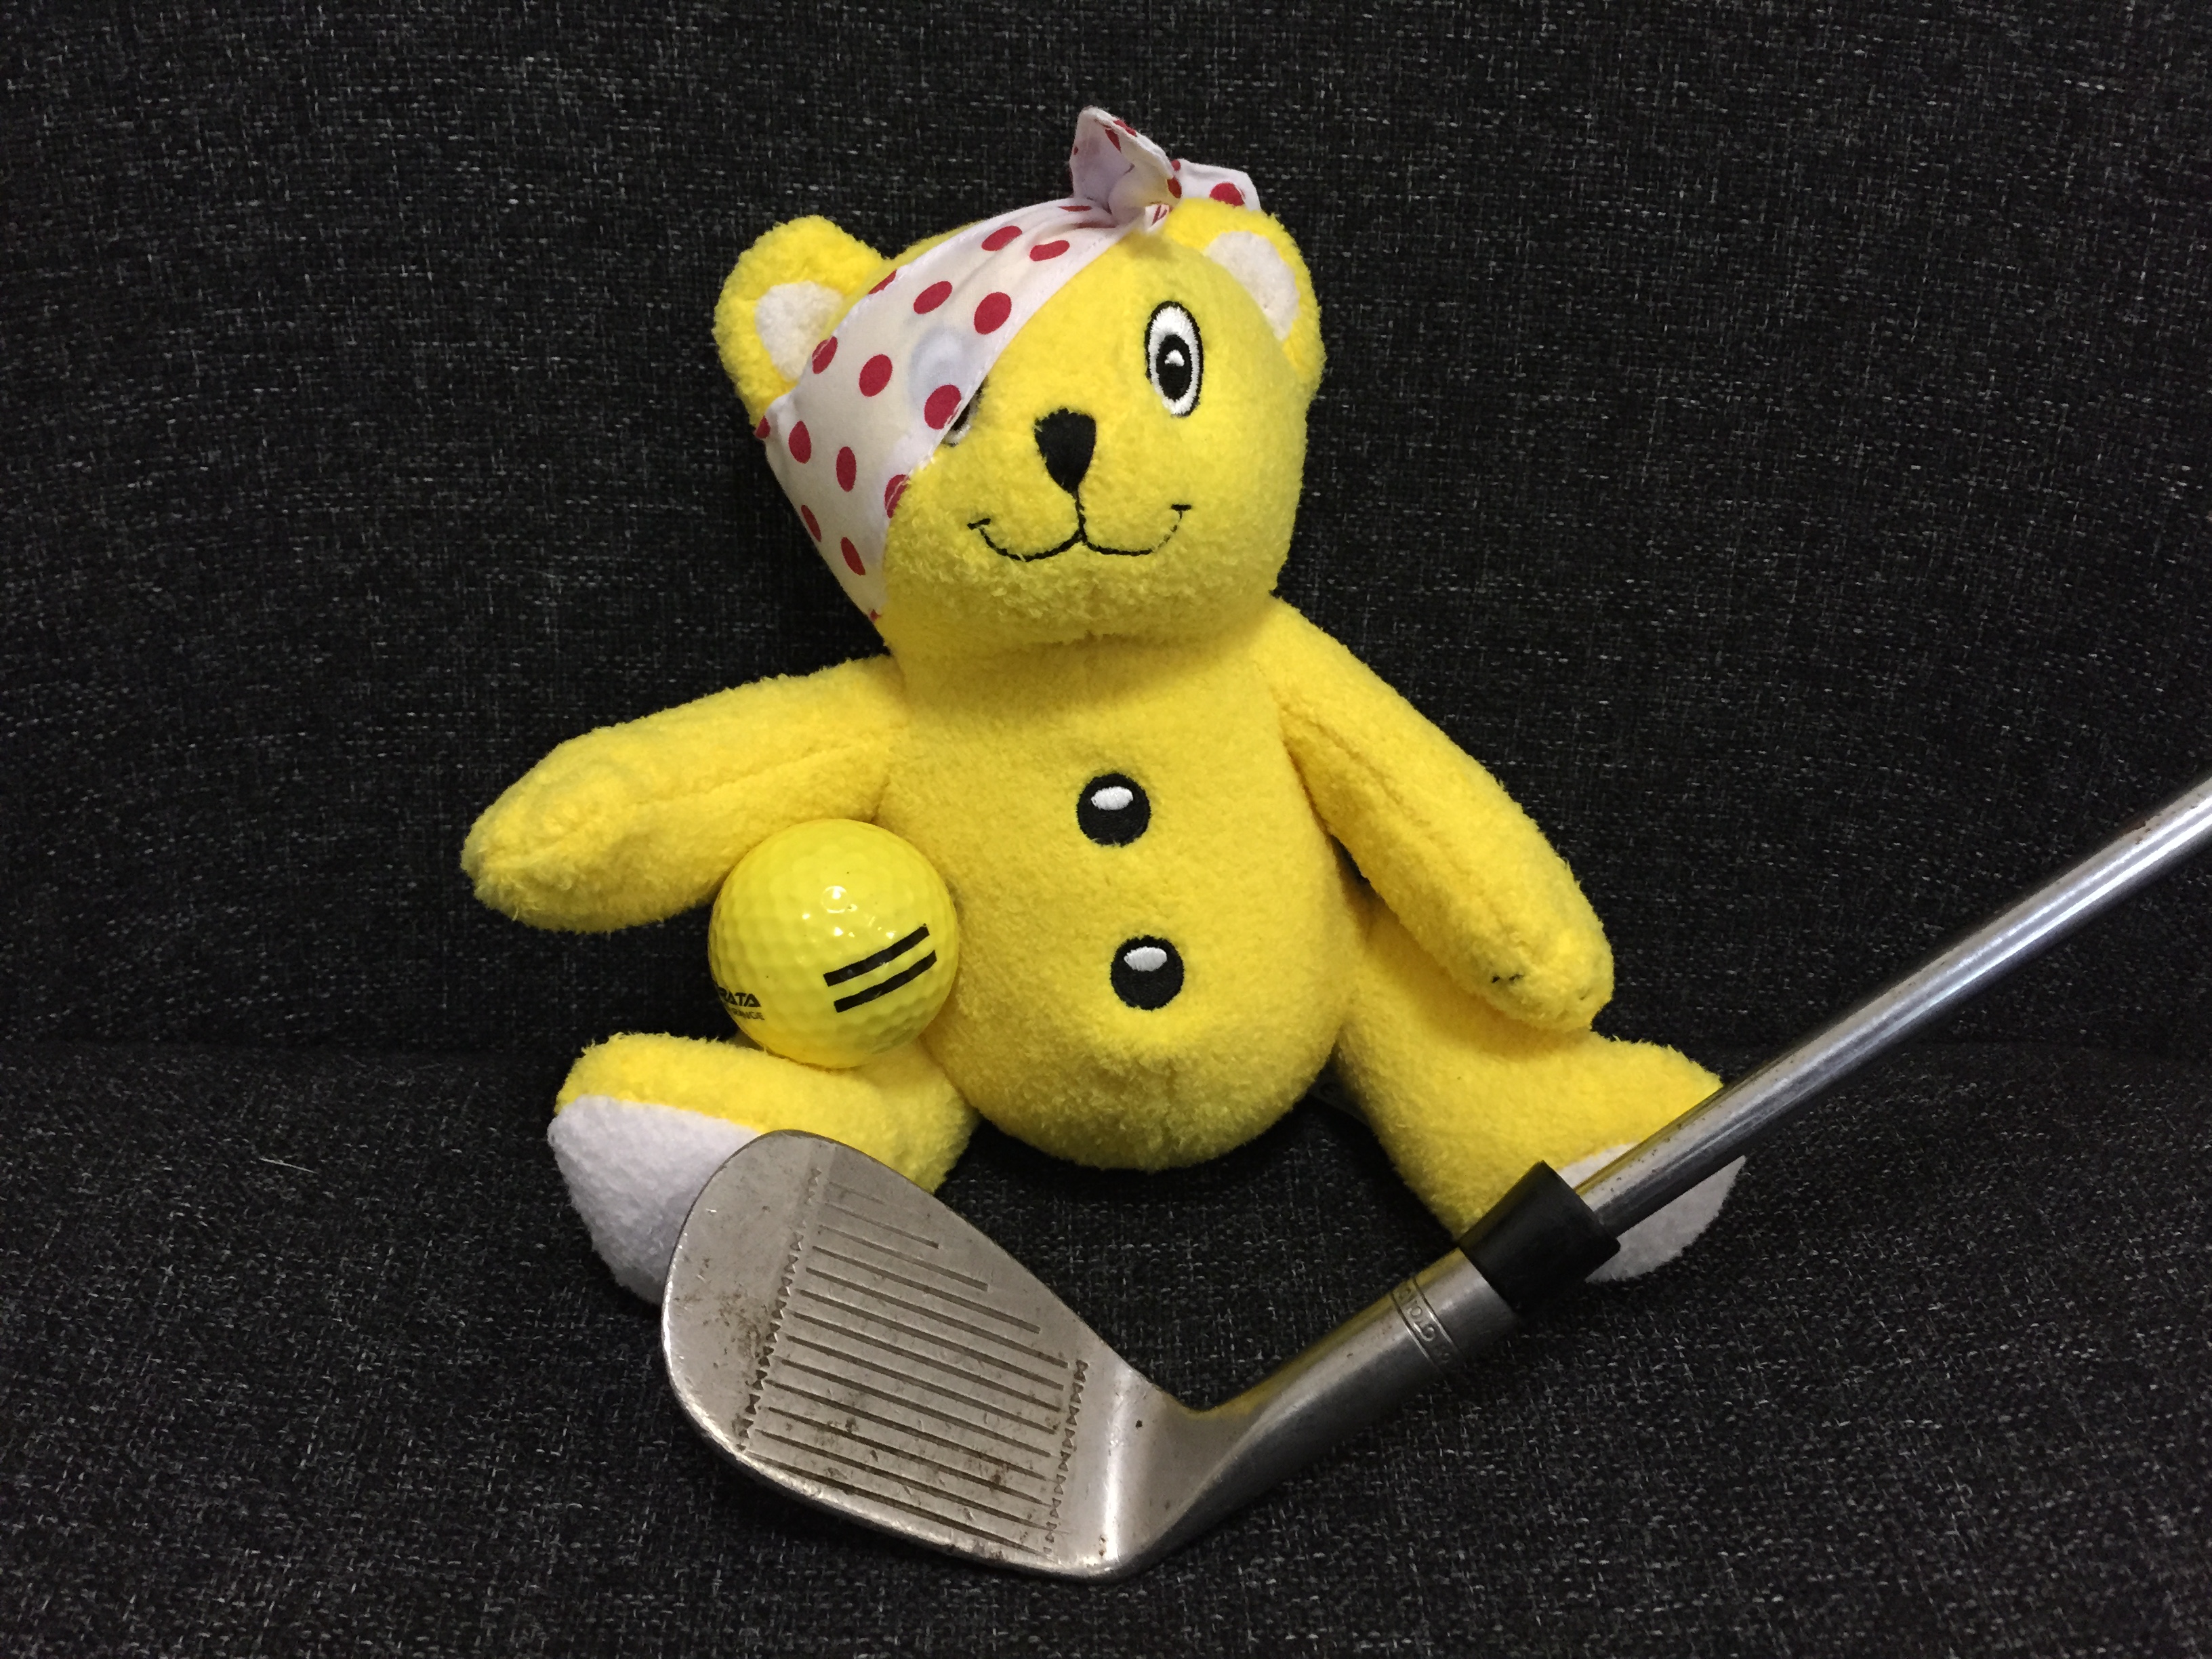 A small Pudsey bear soft toy posing with a golf club and ball